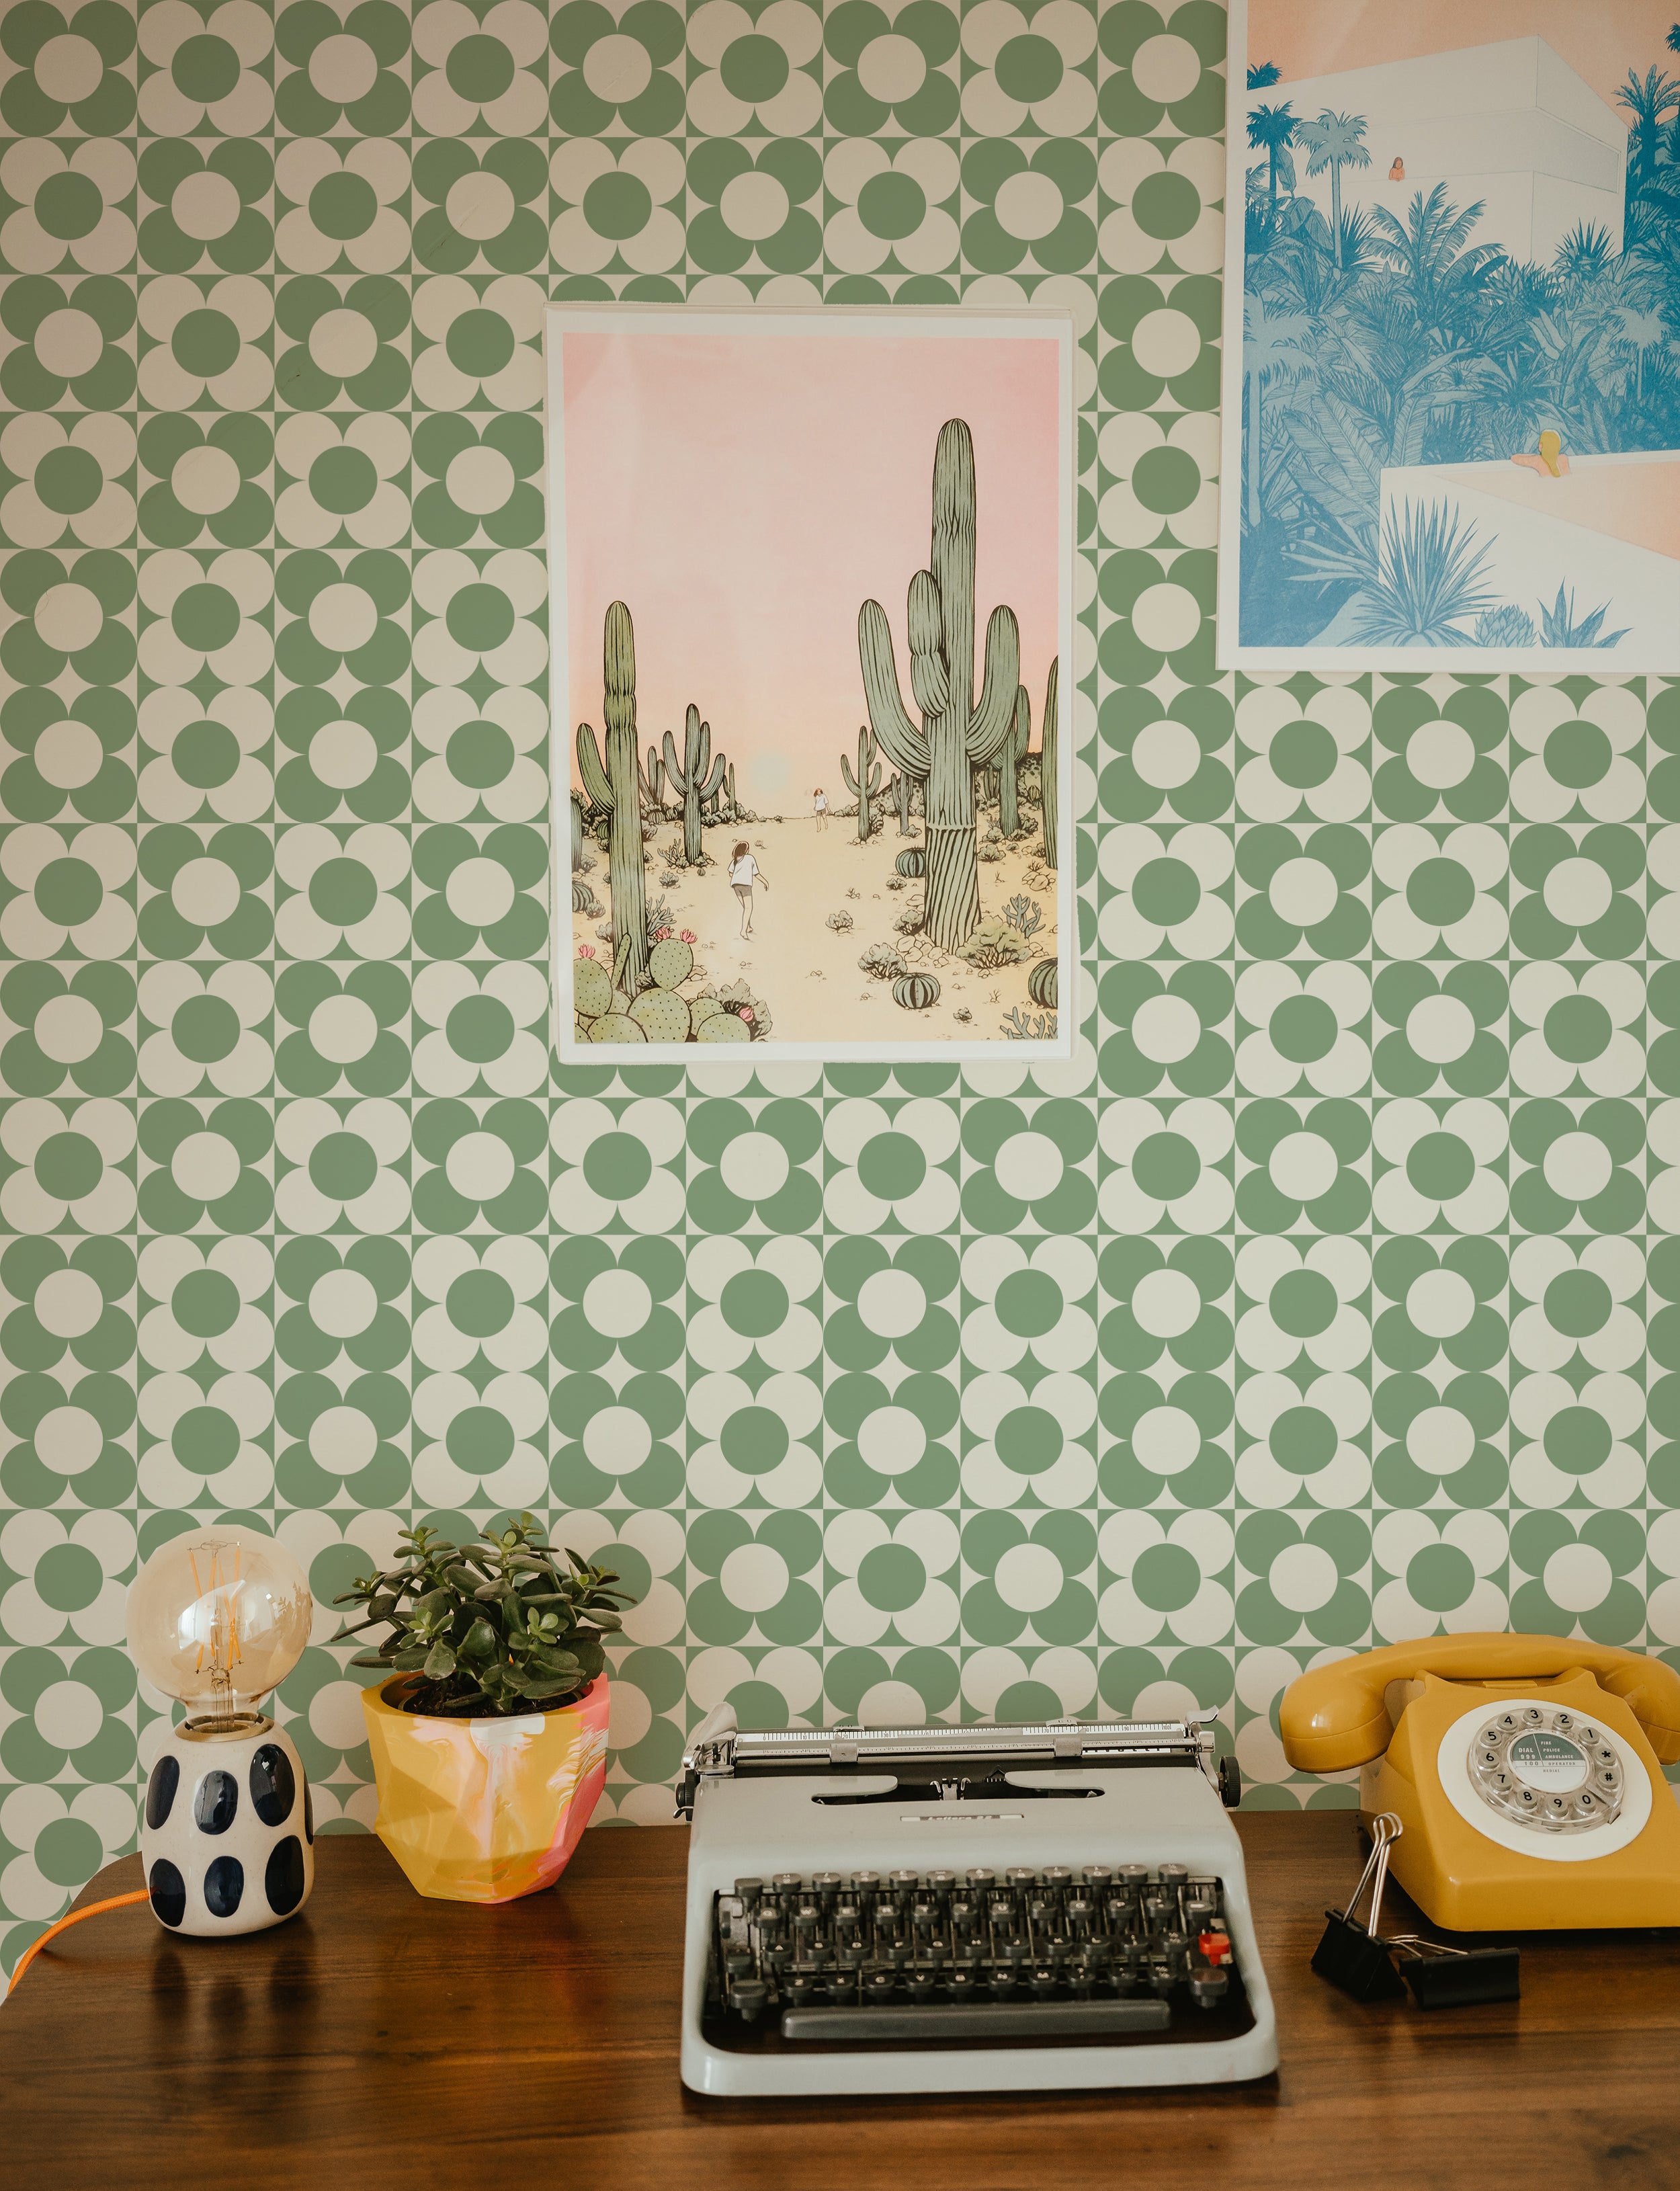 A retro-styled home office space featuring the Vintage Groovy Wallpaper - Green. The wall is covered with a green and white circular geometric pattern that complements the vintage decor including a yellow rotary phone, a classic typewriter, and colorful desk accessories, creating a cheerful and nostalgic atmosphere